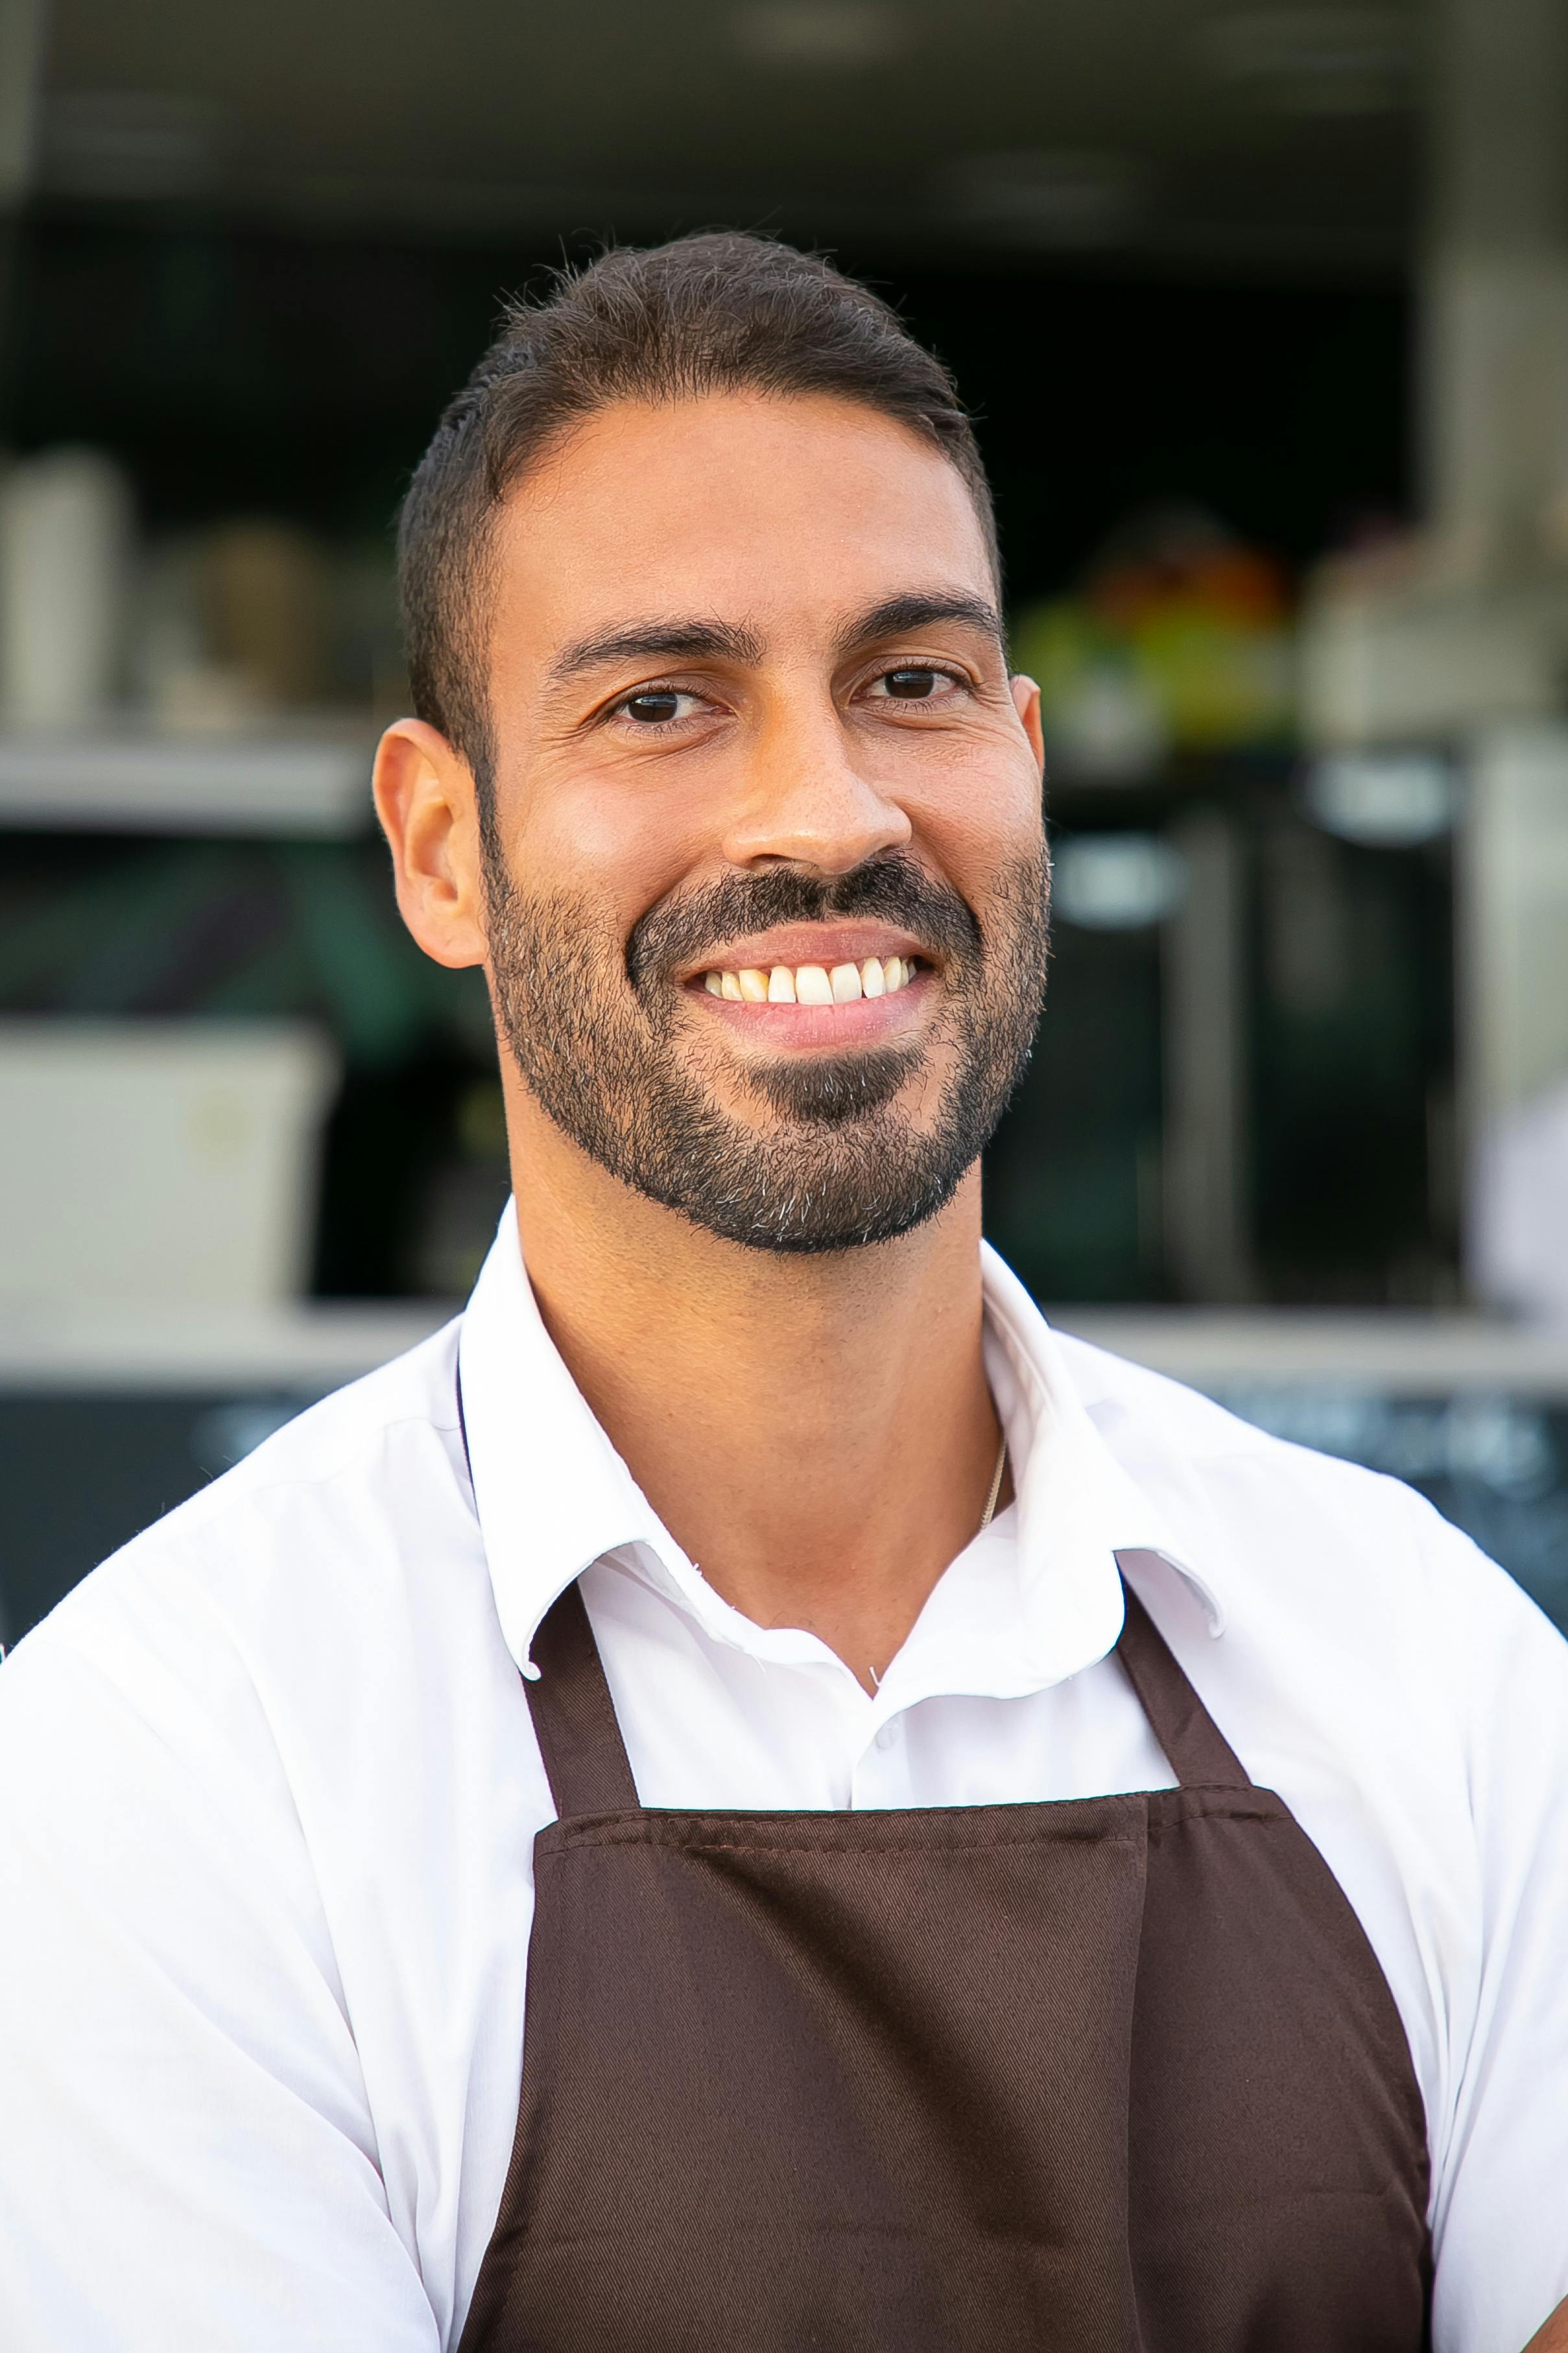 A happy and smiling man dressed in an apron | Source: Pexels